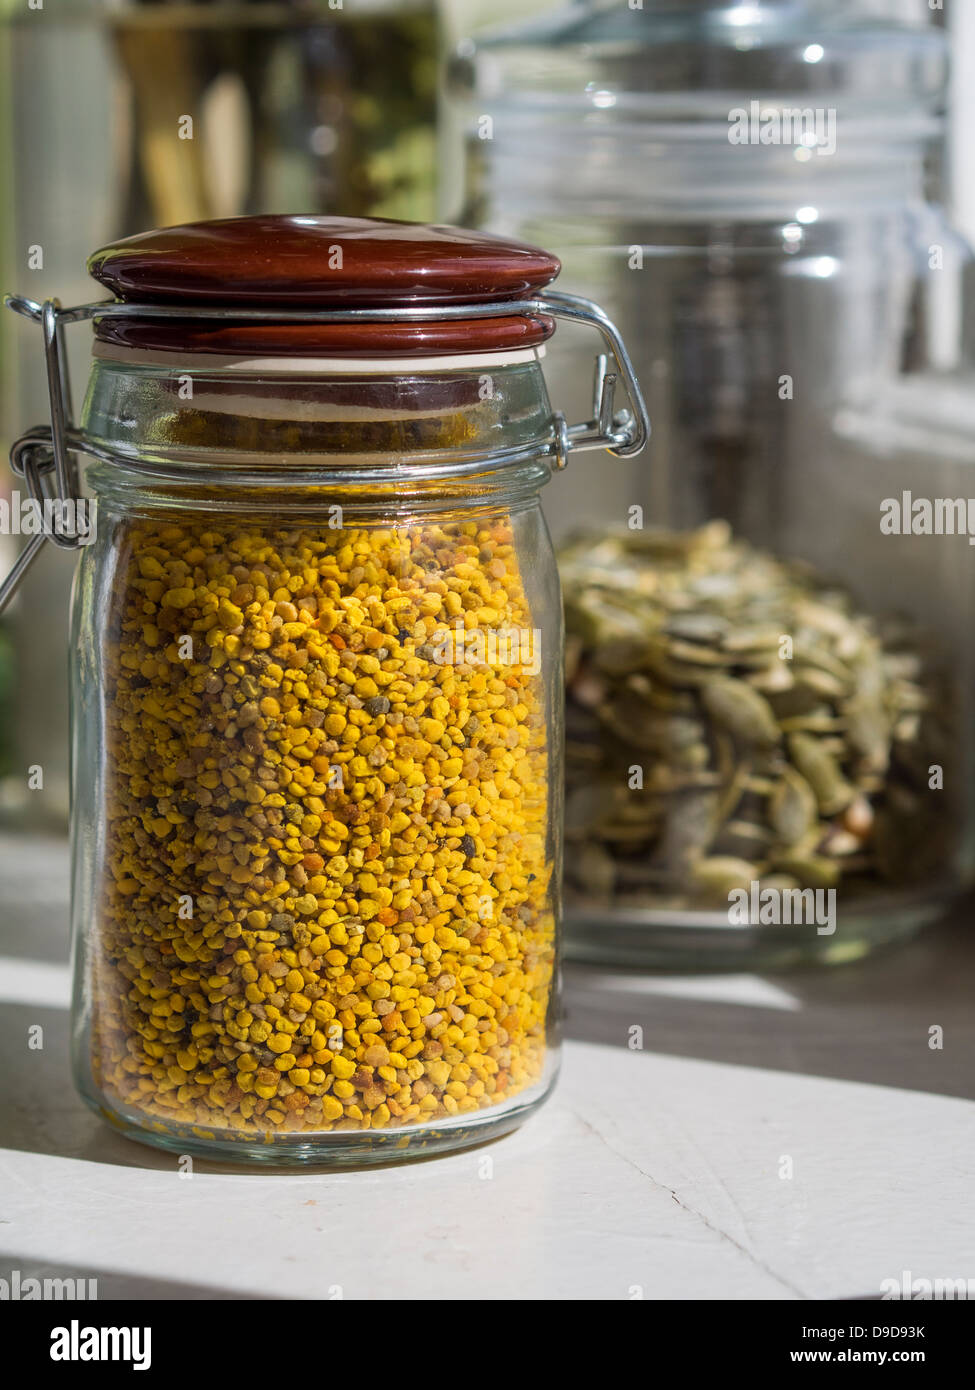 Pollen in a glass jar on a wooden table. Stock Photo